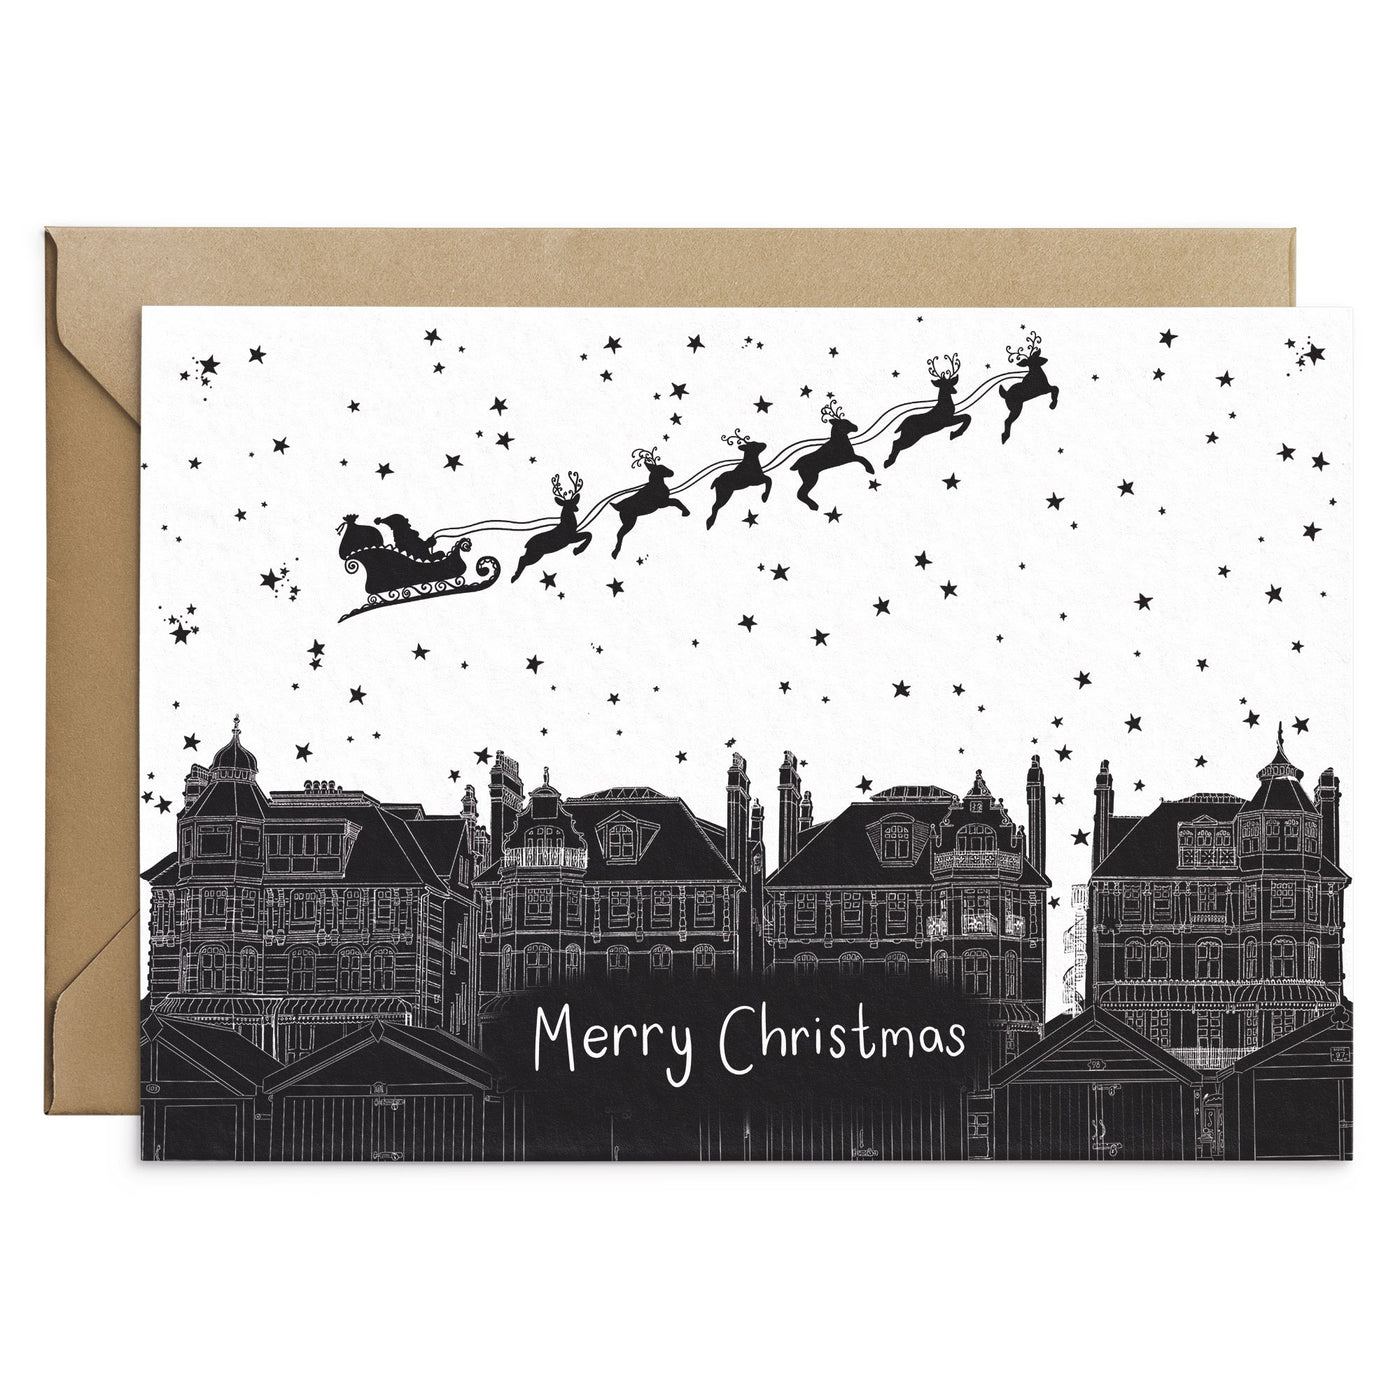 Brighton Kingsway Christmas Card - Poppins & Co.